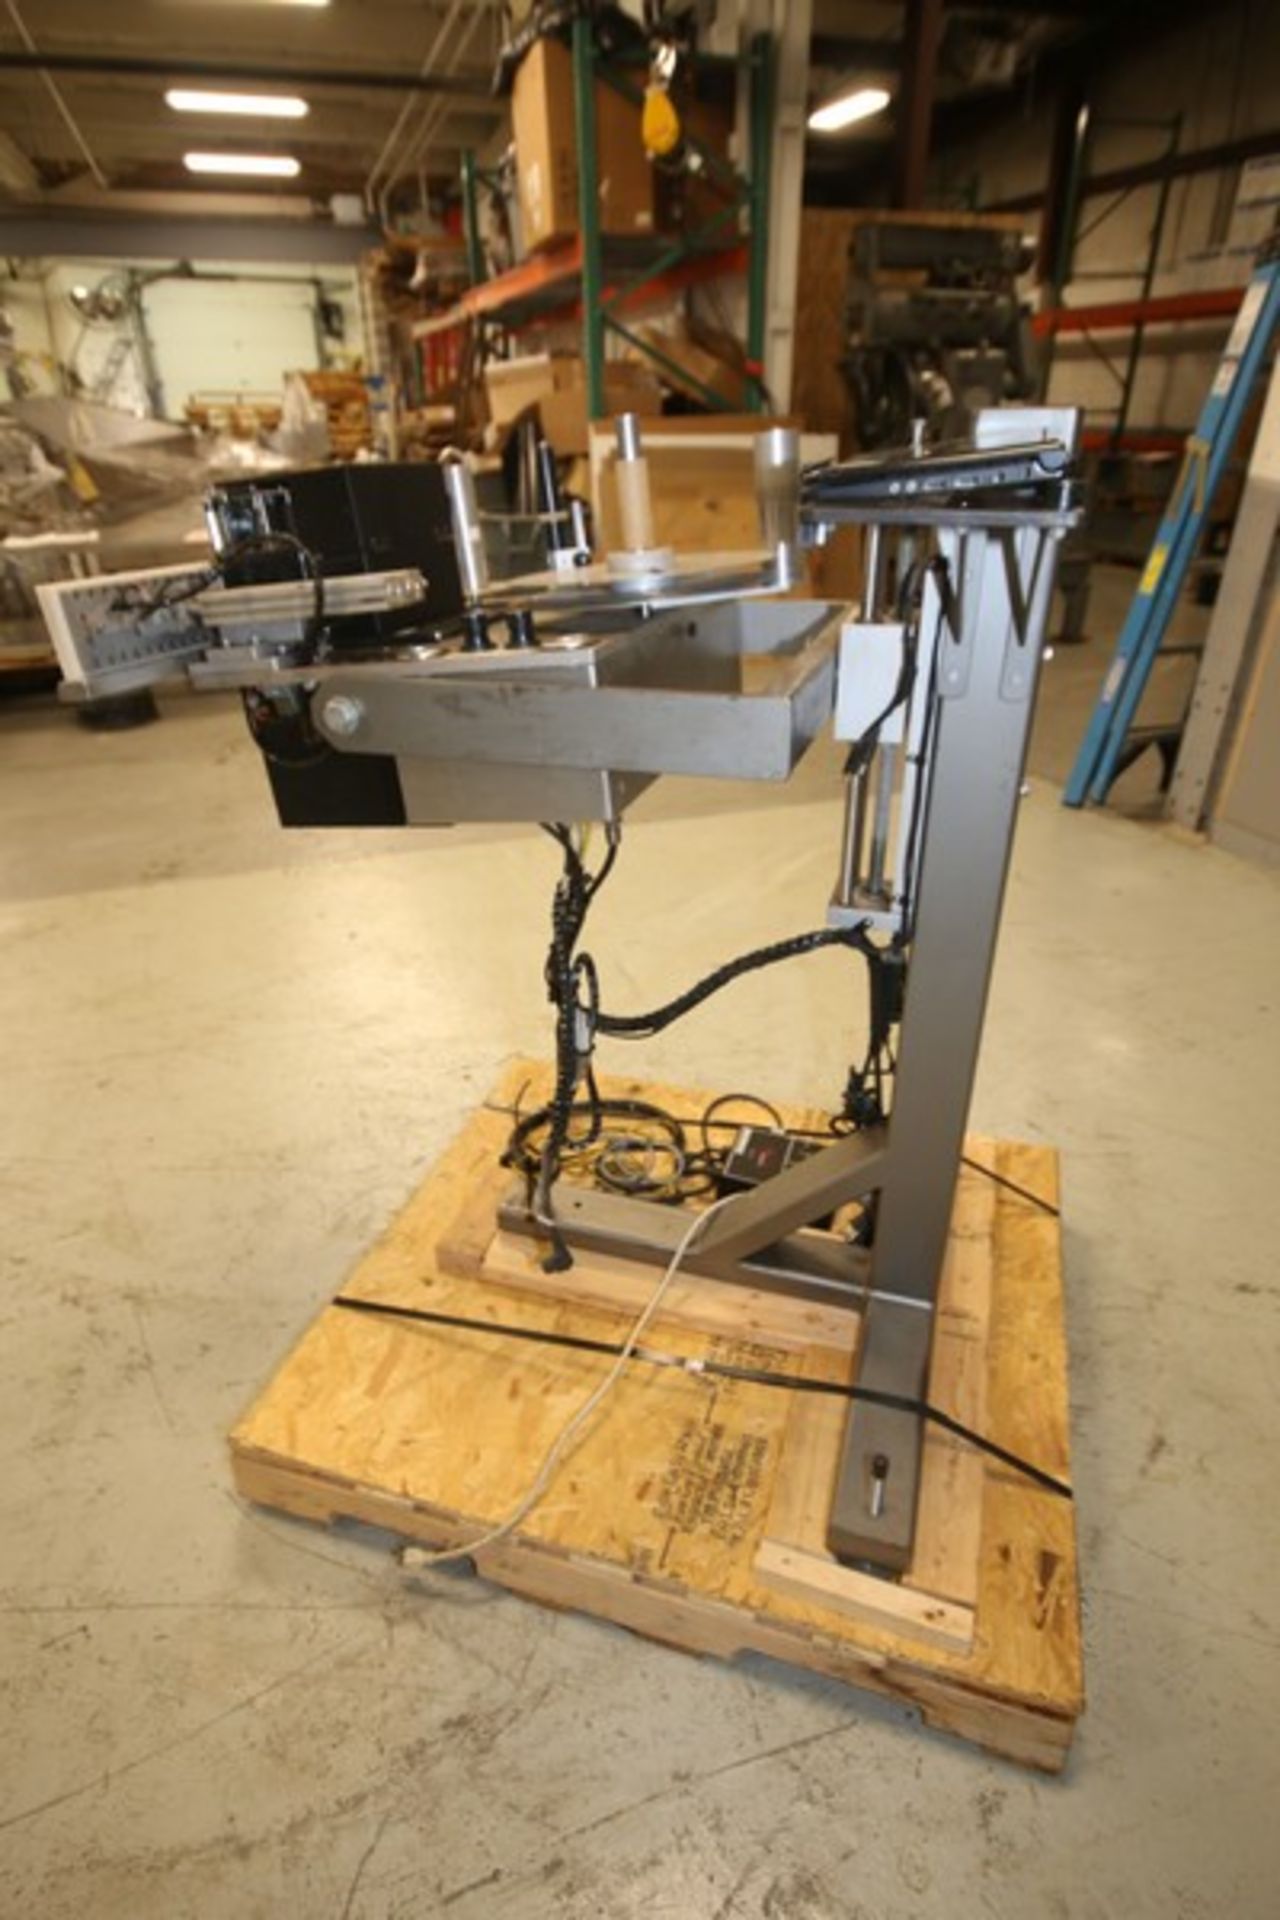 XPak Roll Fed Labeler, Model XP-A8200, SN SX052010, 115V, Mounted on Stand with Top Mounted Sato M- - Image 5 of 8